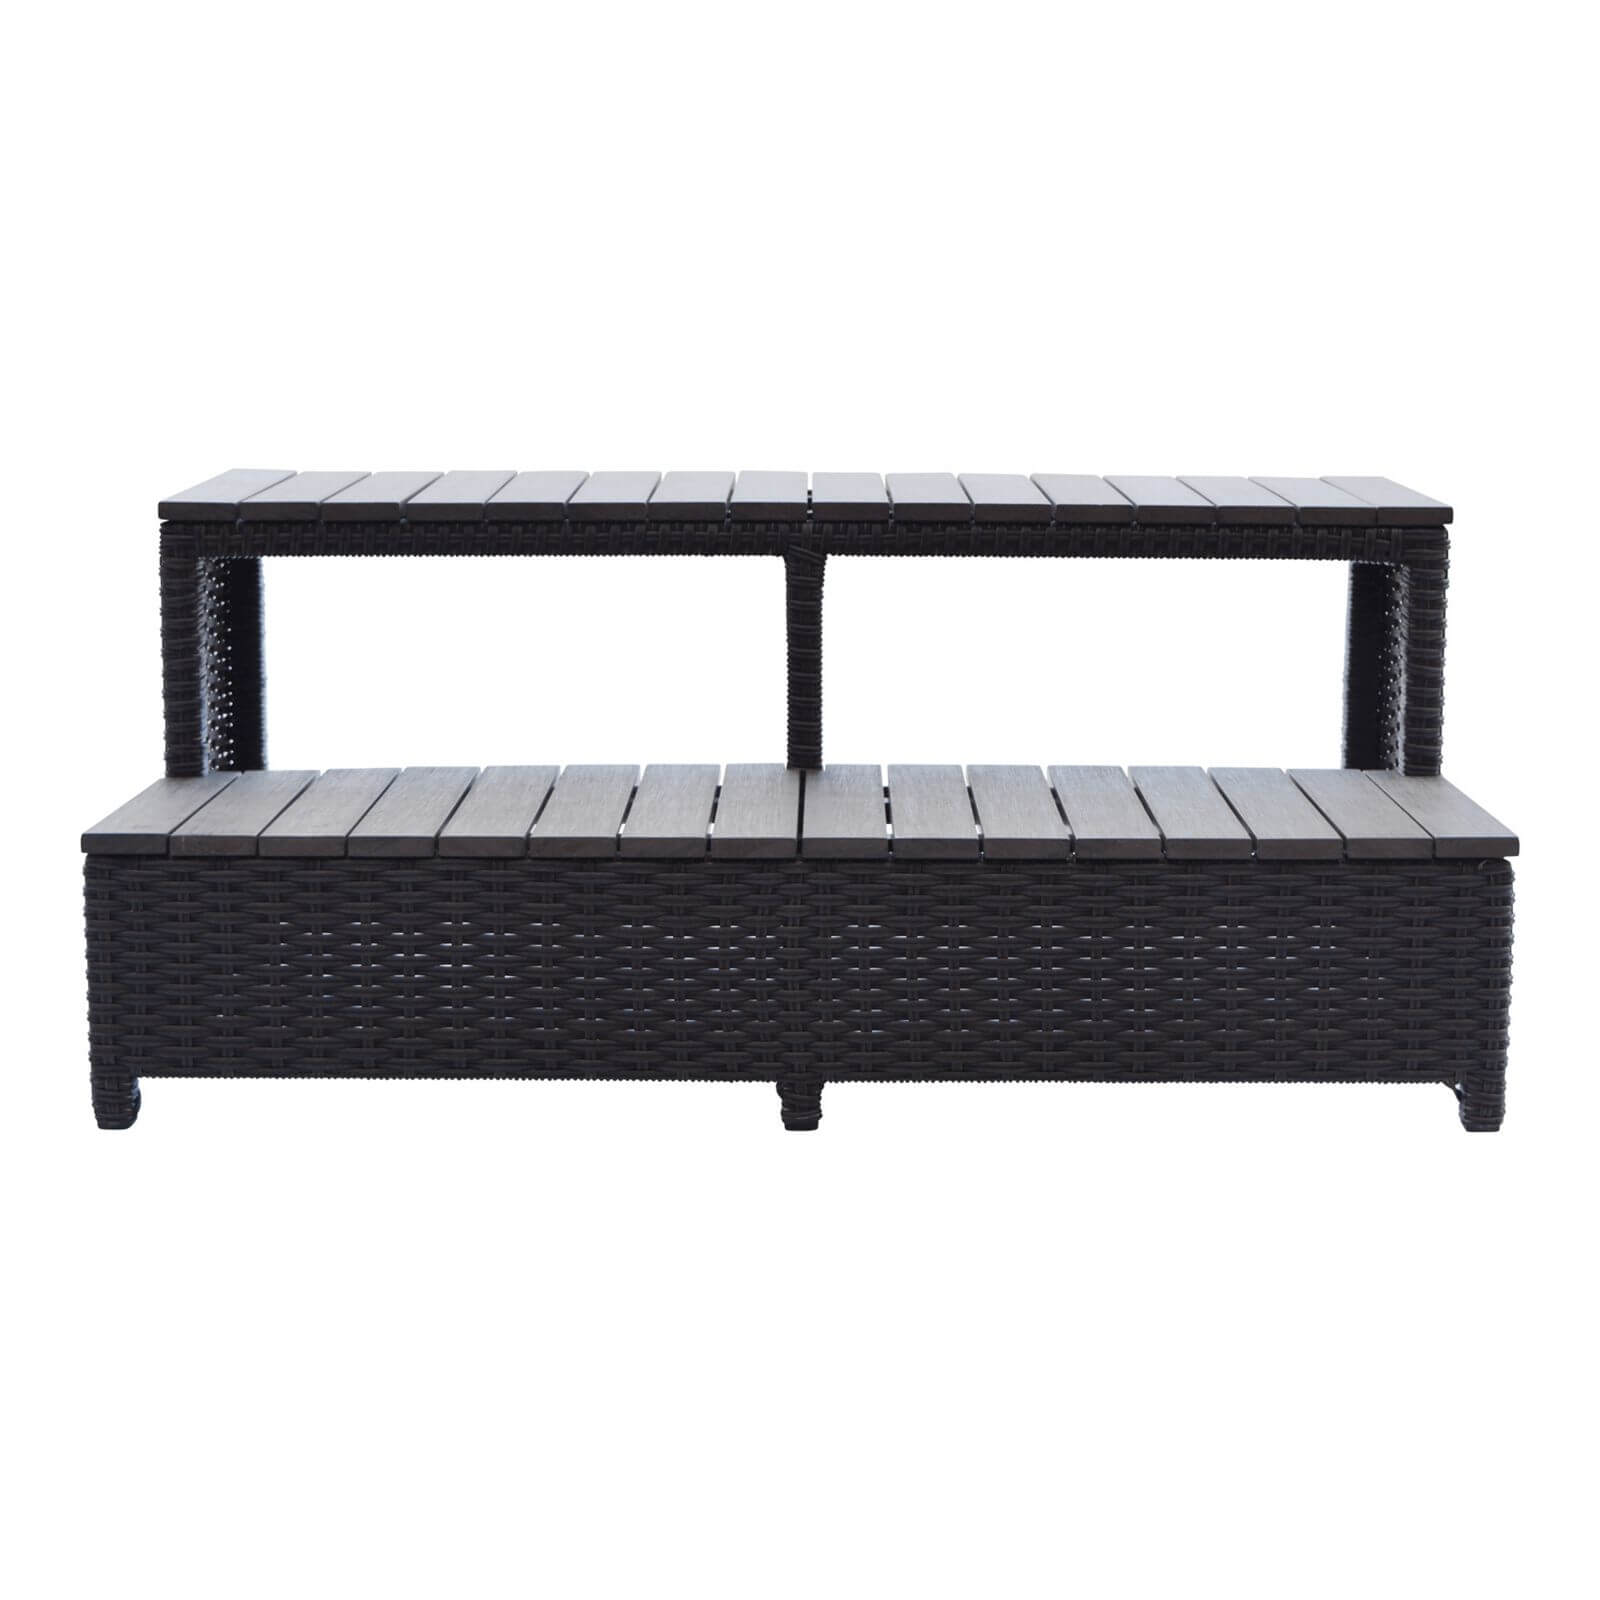 Canadian Spa Rattan Square Spa Step for 86in Hot Tub